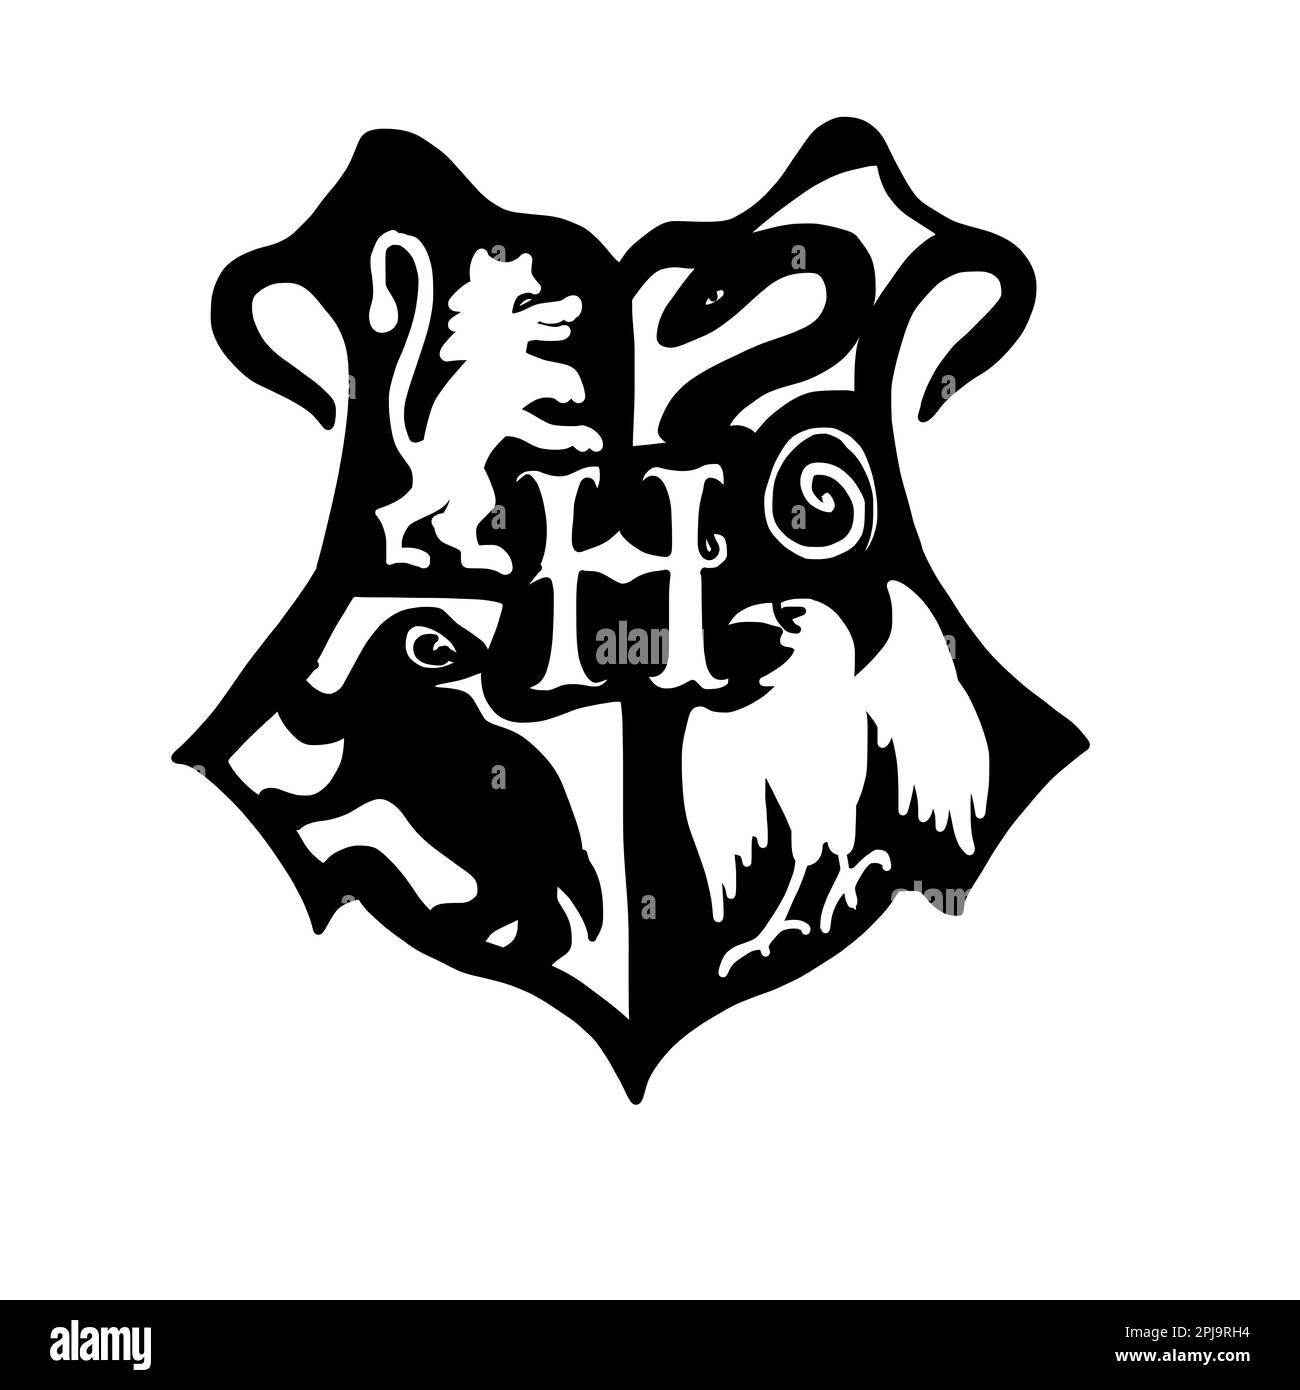 Harry Potter Hogwarts logo in cartoon doodle style. Vector illustration isolated on white background. Stock Vector